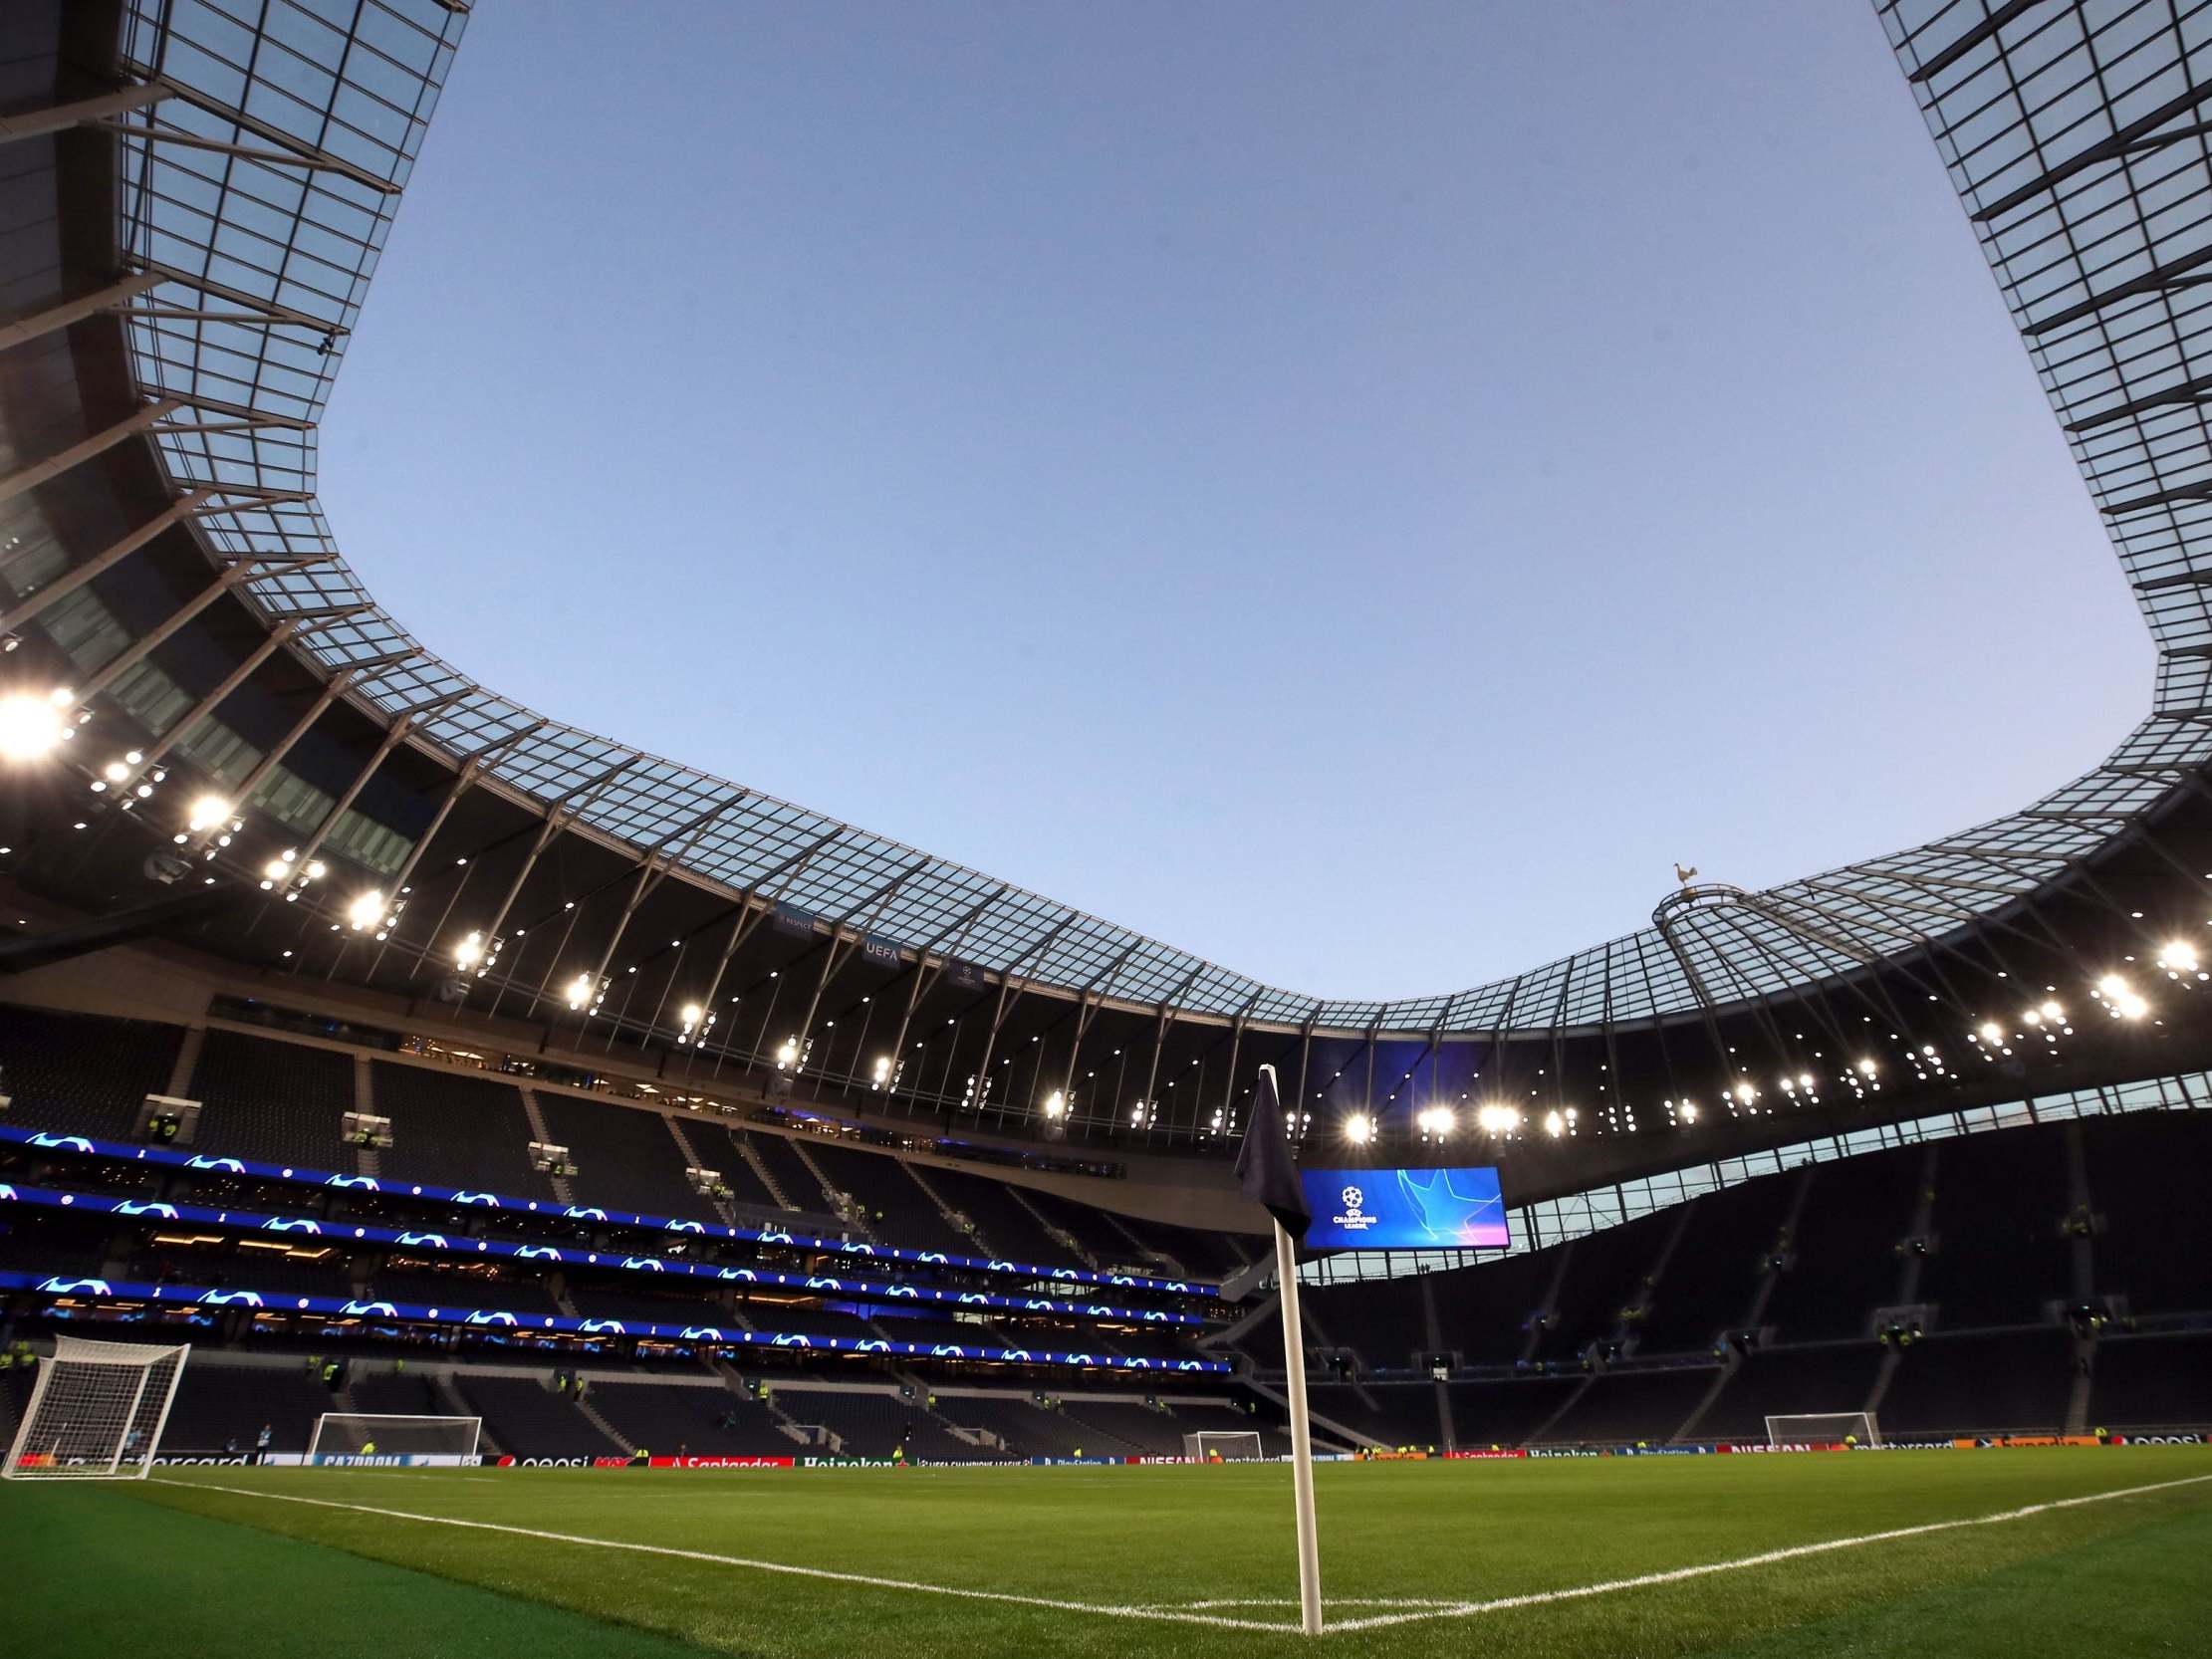 The Tottenham Hotspur Stadium gears up for the arrival of Red Star